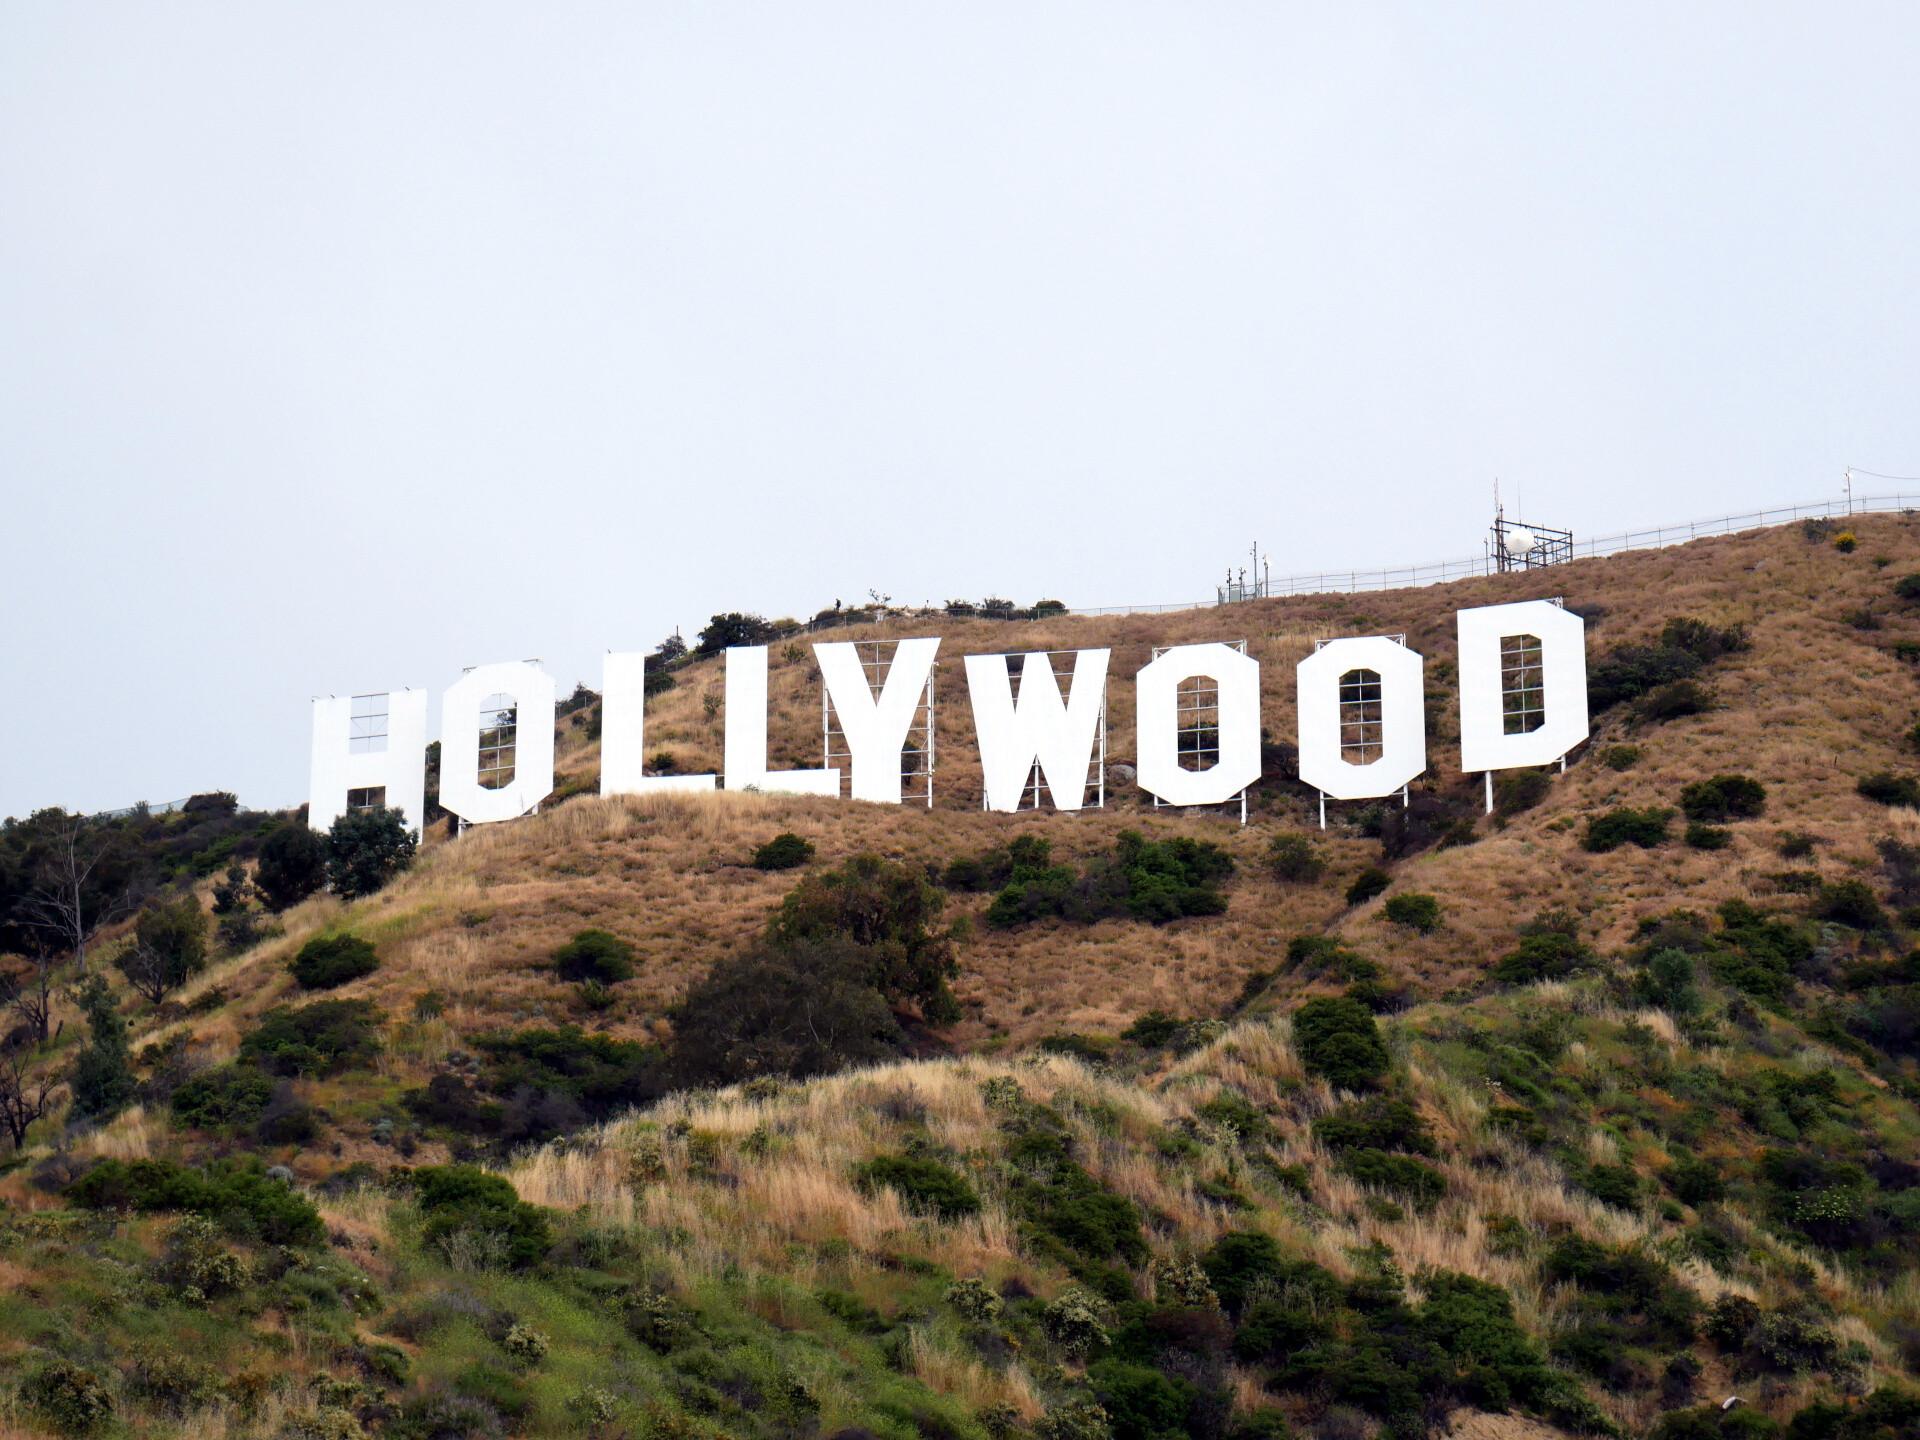 Hollywood Sign: An American cultural icon and landmark located in Los Angeles, California. 1920x1440 HD Wallpaper.